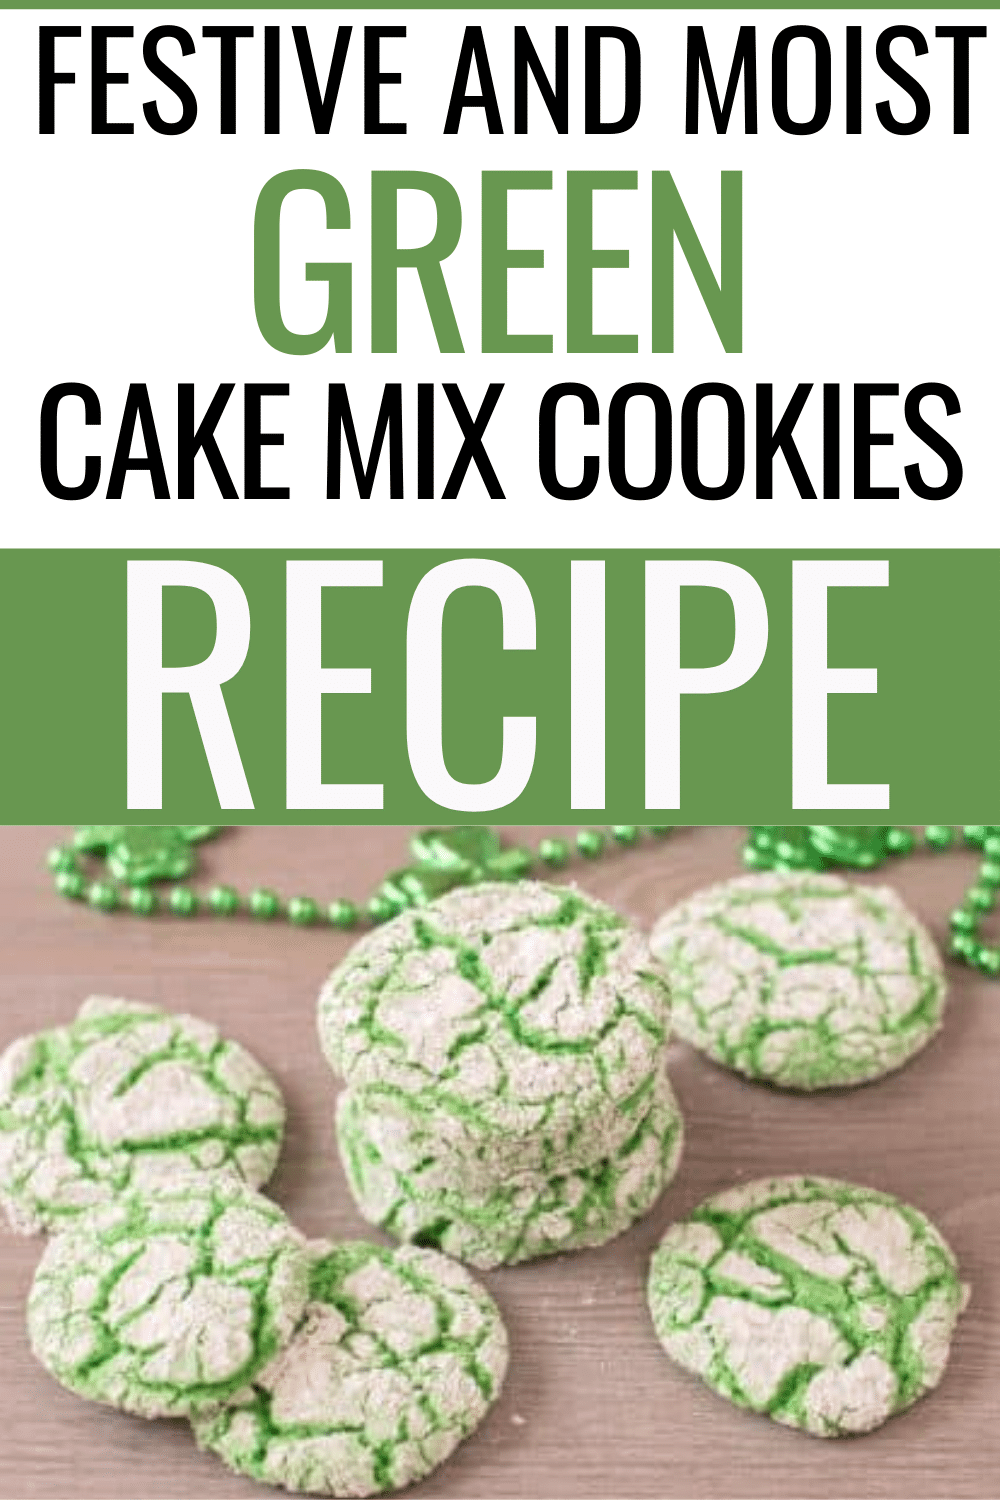 These Green Cake Mix Cookies make a festive addition to celebrations like Dr. Seuss Day, St. Patrick's Day and Christmas. The best part is you can keep the ingredients on hand so you can whip them up easily. #greencookies #drseuss #stpatricksday #christmas via @wondermomwannab